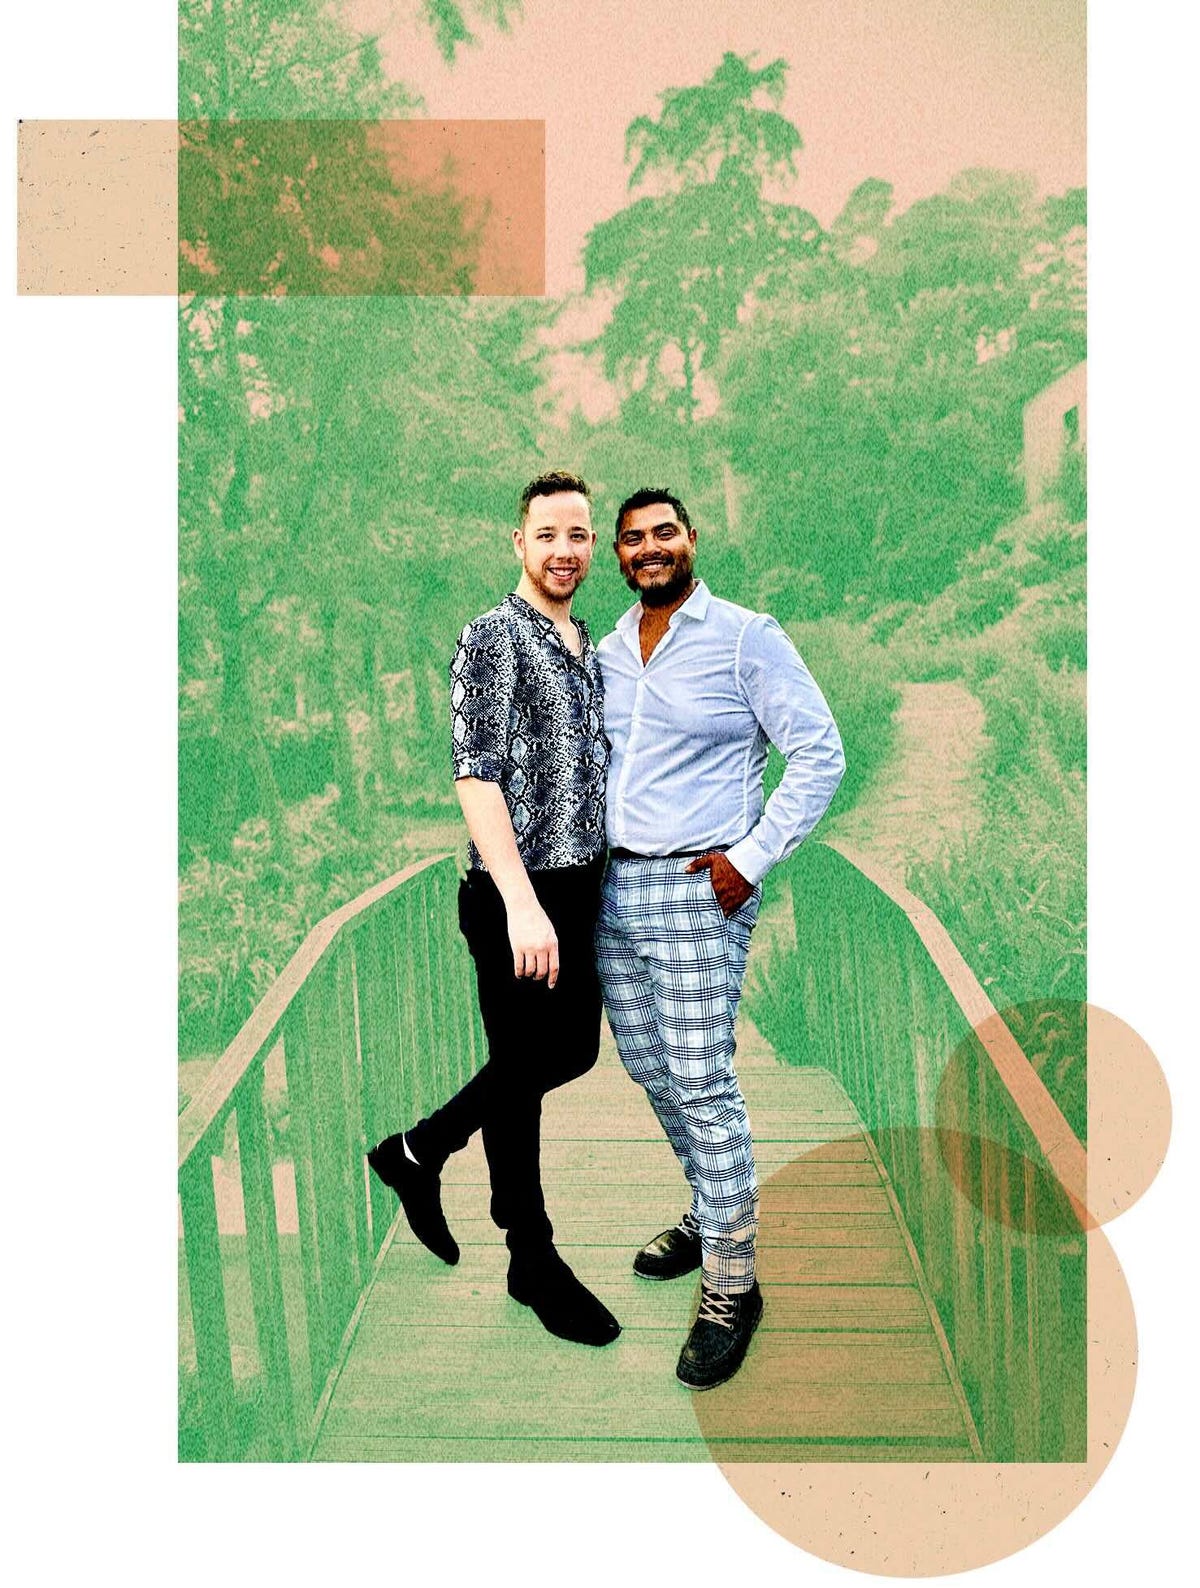 Two men stand side by side on a small bridge in a park